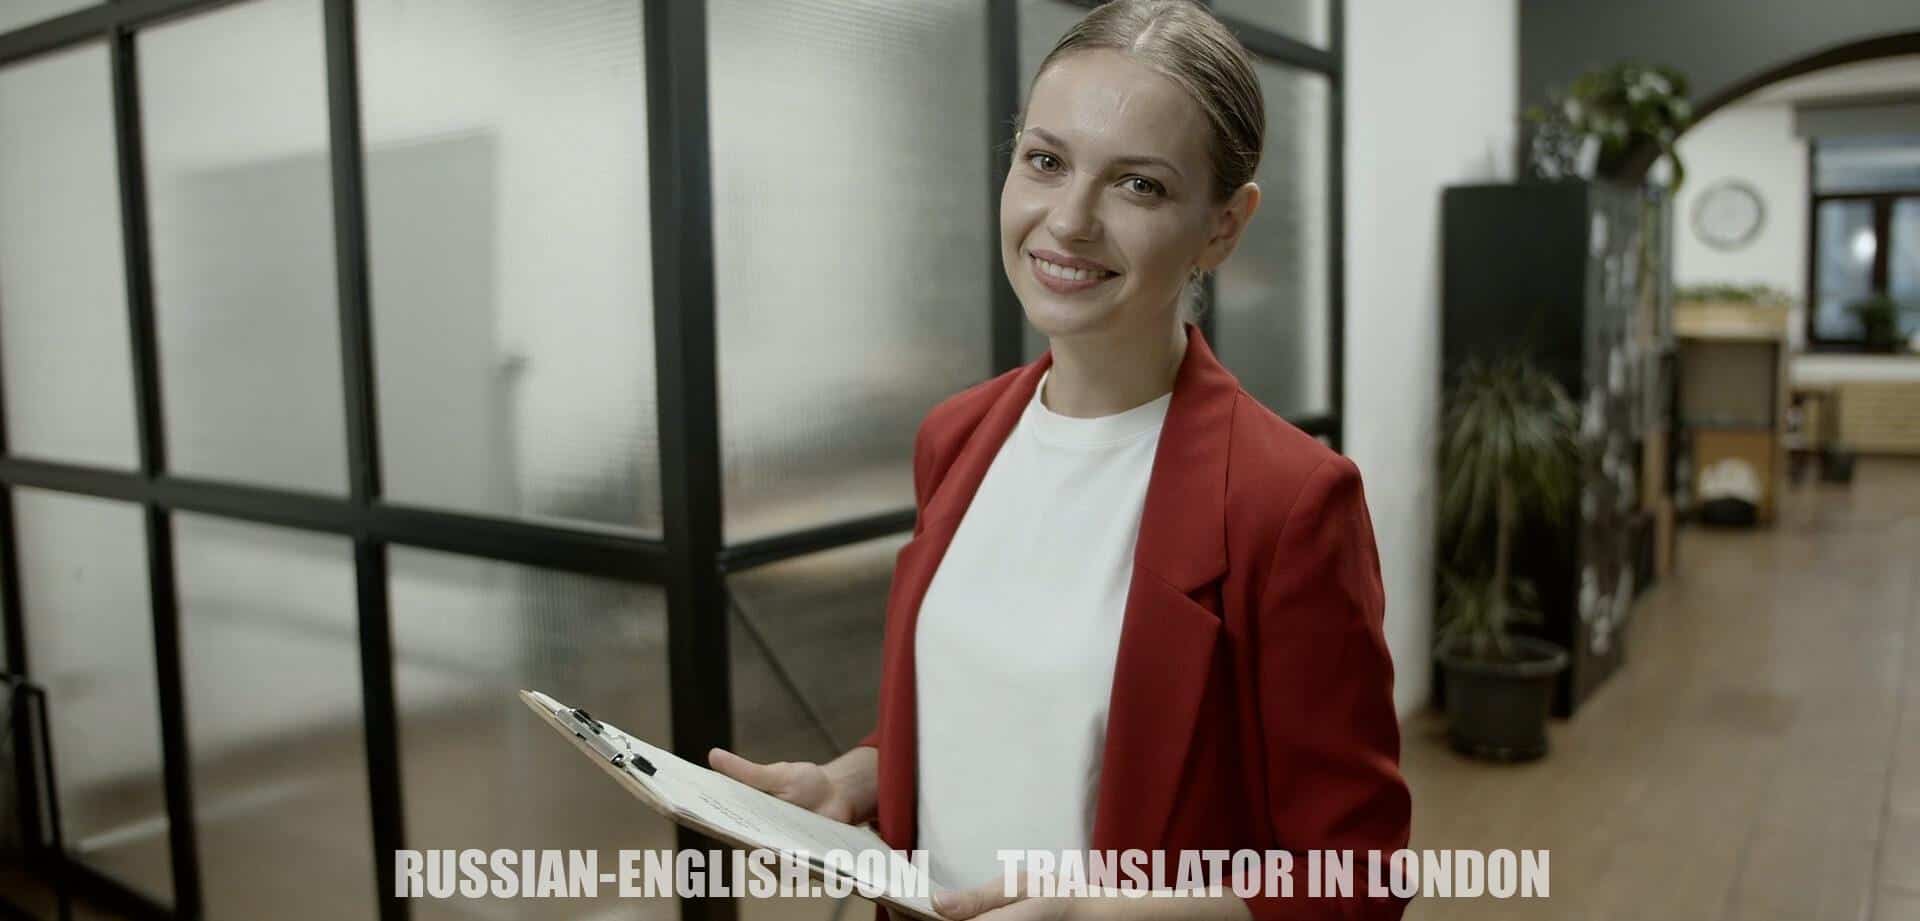 We provide professional Russian-English business assistance for companies attending conferences and events in Switzerland, including Geneva and Zurich. Our services include language translation, event registration, on-site support, and post-conference follow-up. Reach out to our experienced team at info@russian-english.com to ensure a successful and stress-free experience at your next event. Contact: info@russian-english.com